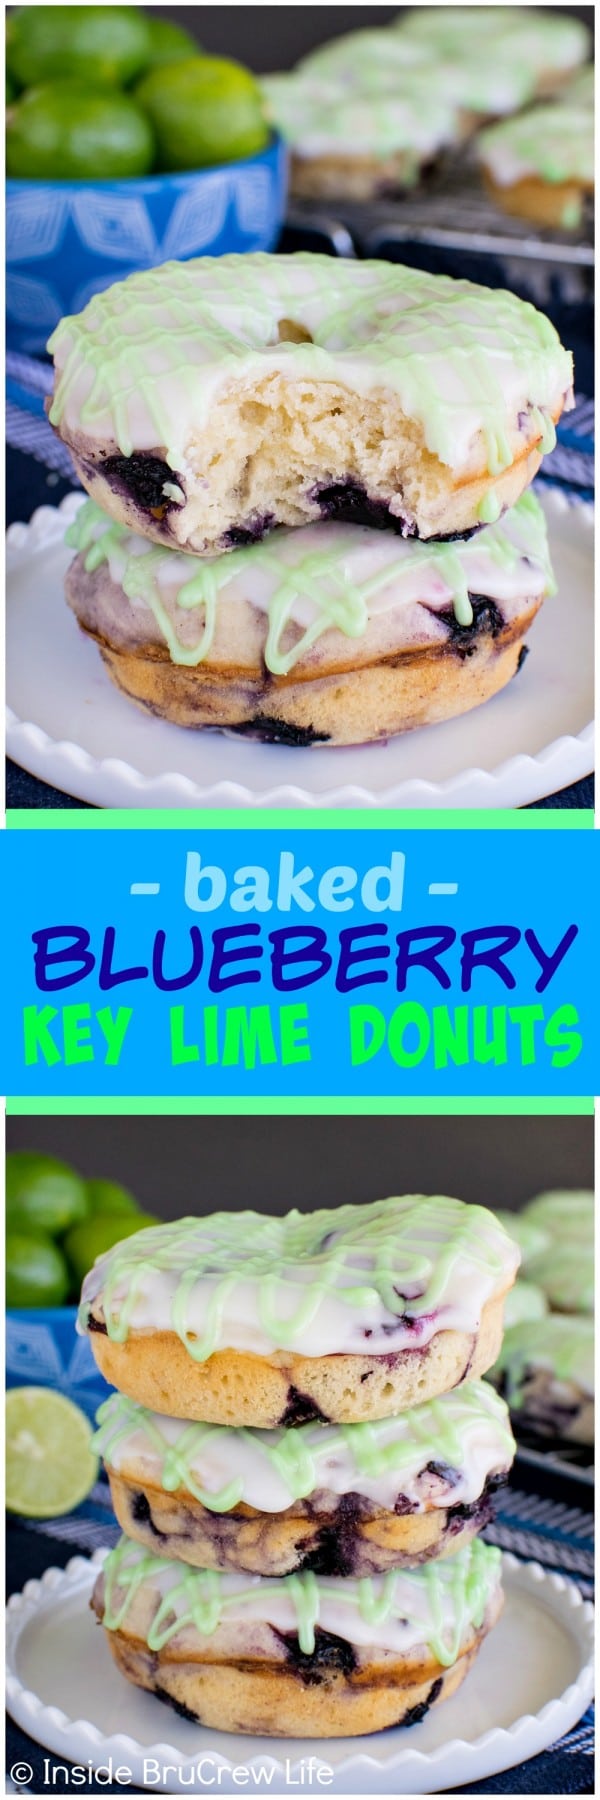 Blueberry Key Lime Donuts - these easy baked donuts are loaded with blueberries and fruit juice. Awesome summer breakfast recipe!